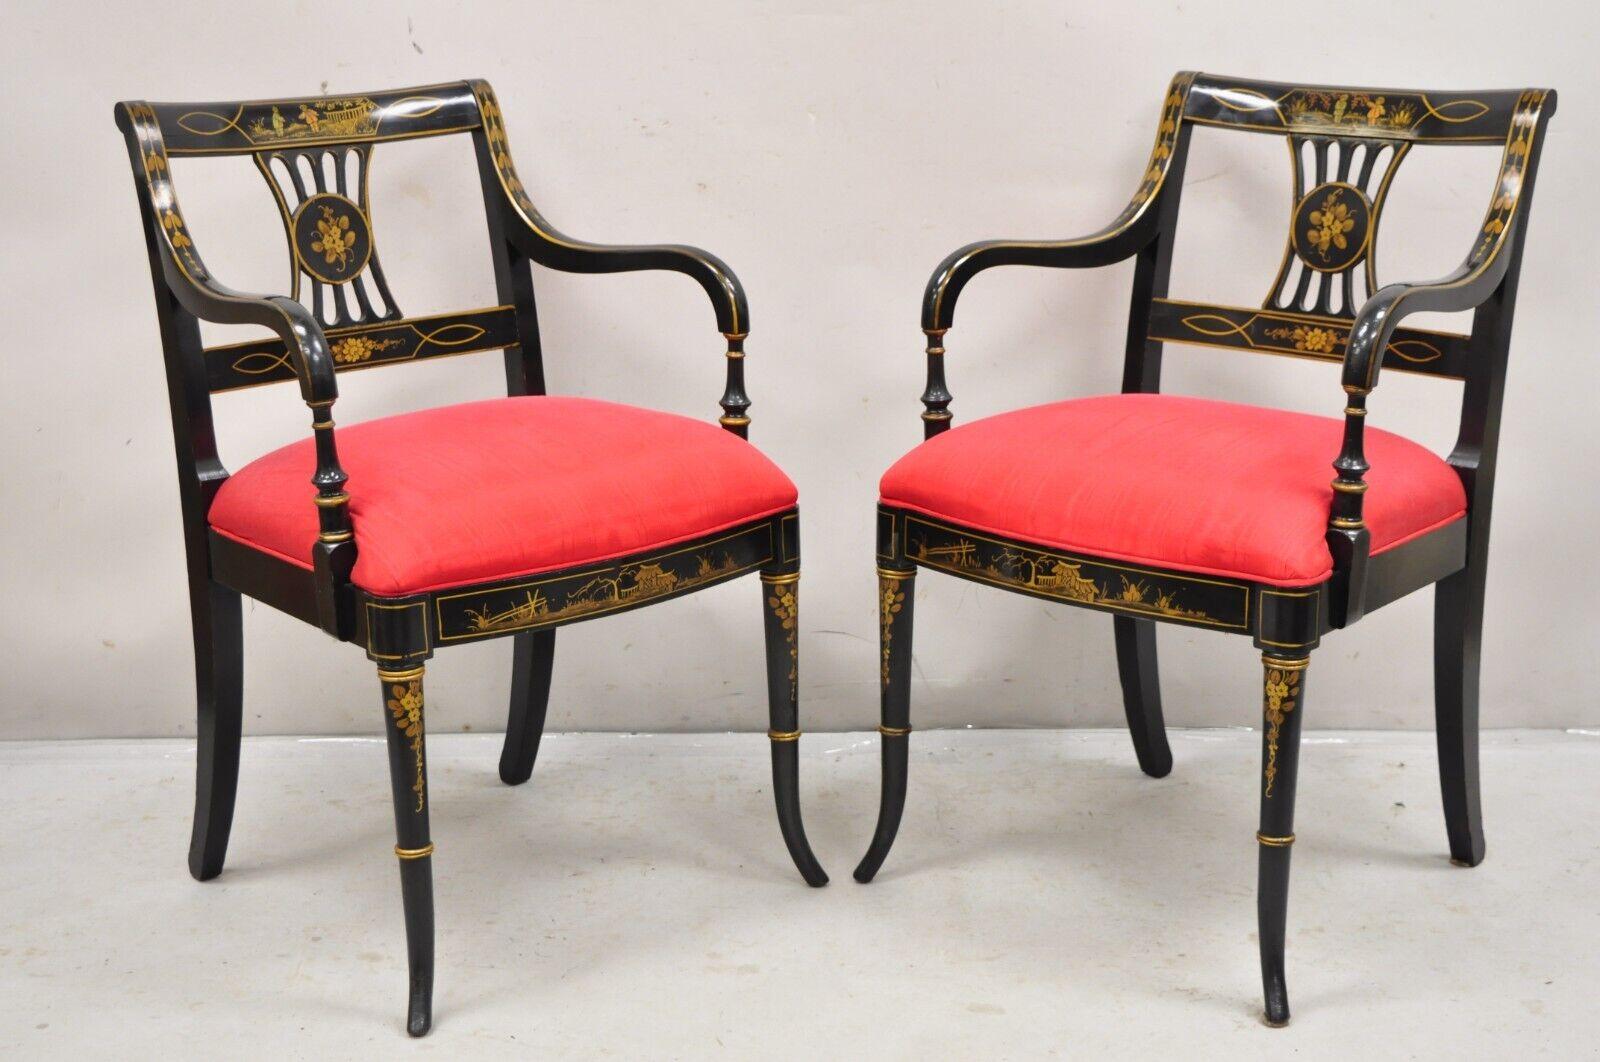 Chinoiseries Union National Chinoiserie English Regency Black Painted Dining Chair - Set of 6 en vente